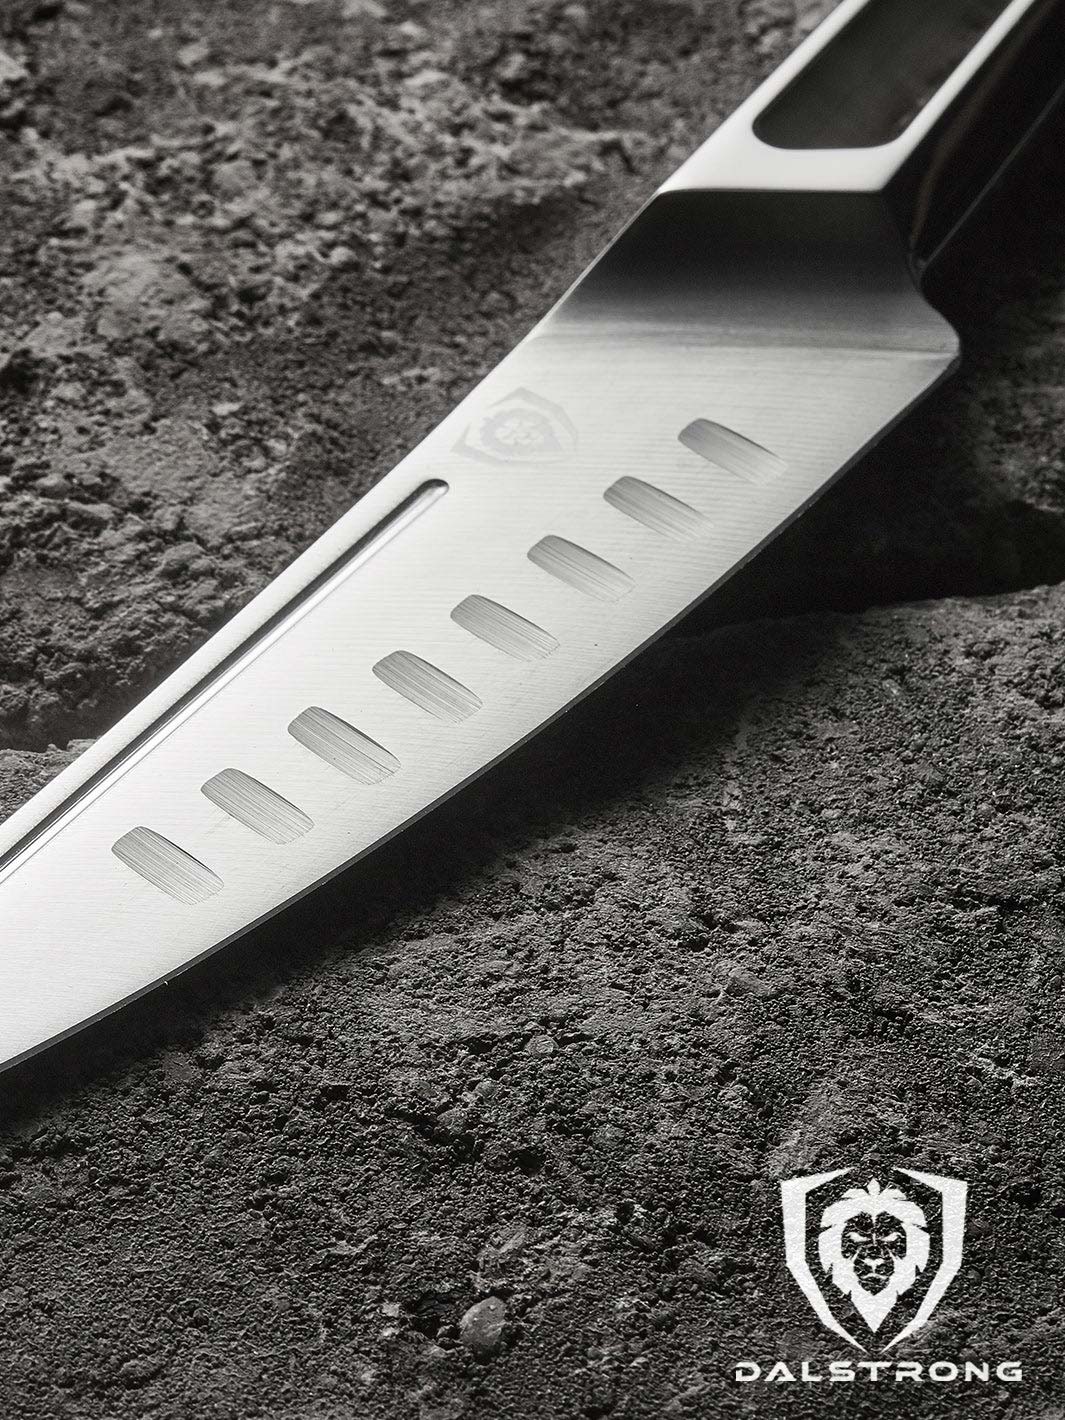 Dalstrong Fillet Knife - 6.5 - Crusader Series - Forged High-Carbon German Stainless Steel - w/Magnetic Sheath - NSF Certified